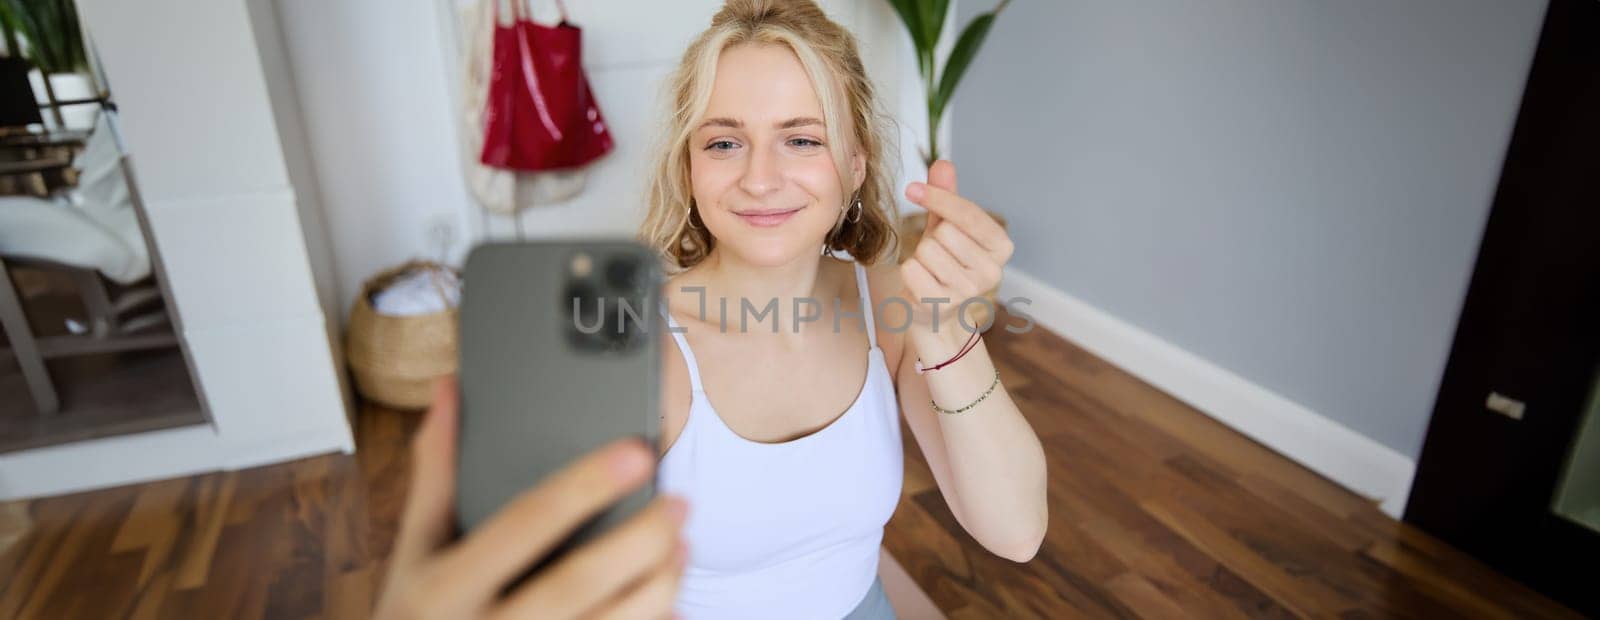 Portrait of young beautiful blond woman, fitness instructor doing exercises at home on yoga mat, taking selfies on smartphone, recording video of herself for social media account about workout.